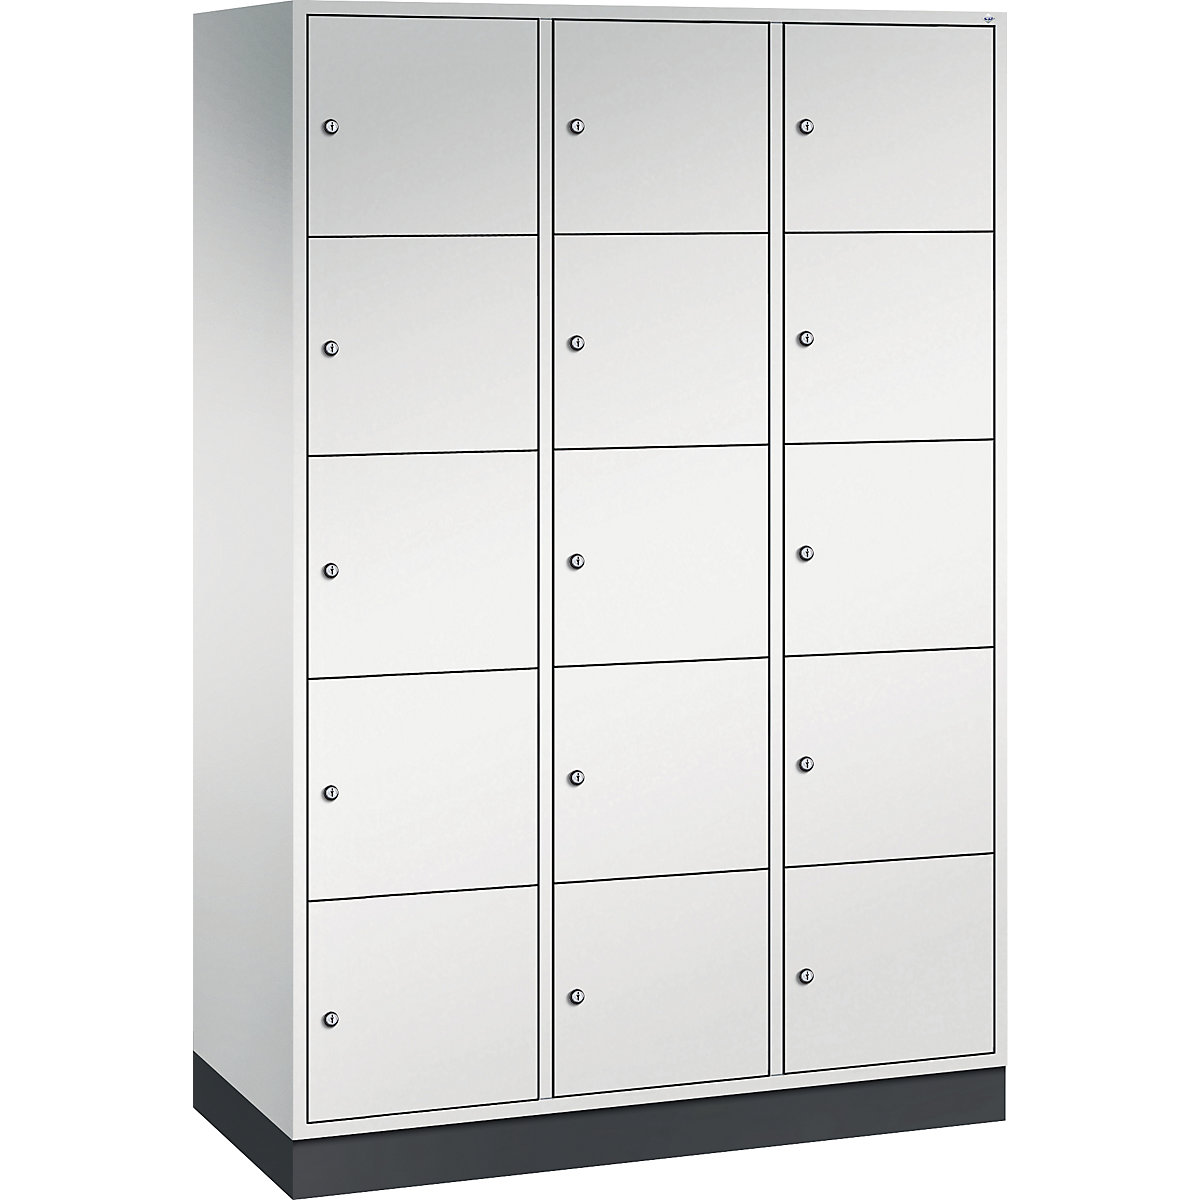 INTRO steel compartment locker, compartment height 345 mm – C+P, WxD 1220 x 500 mm, 15 compartments, light grey body, light grey doors